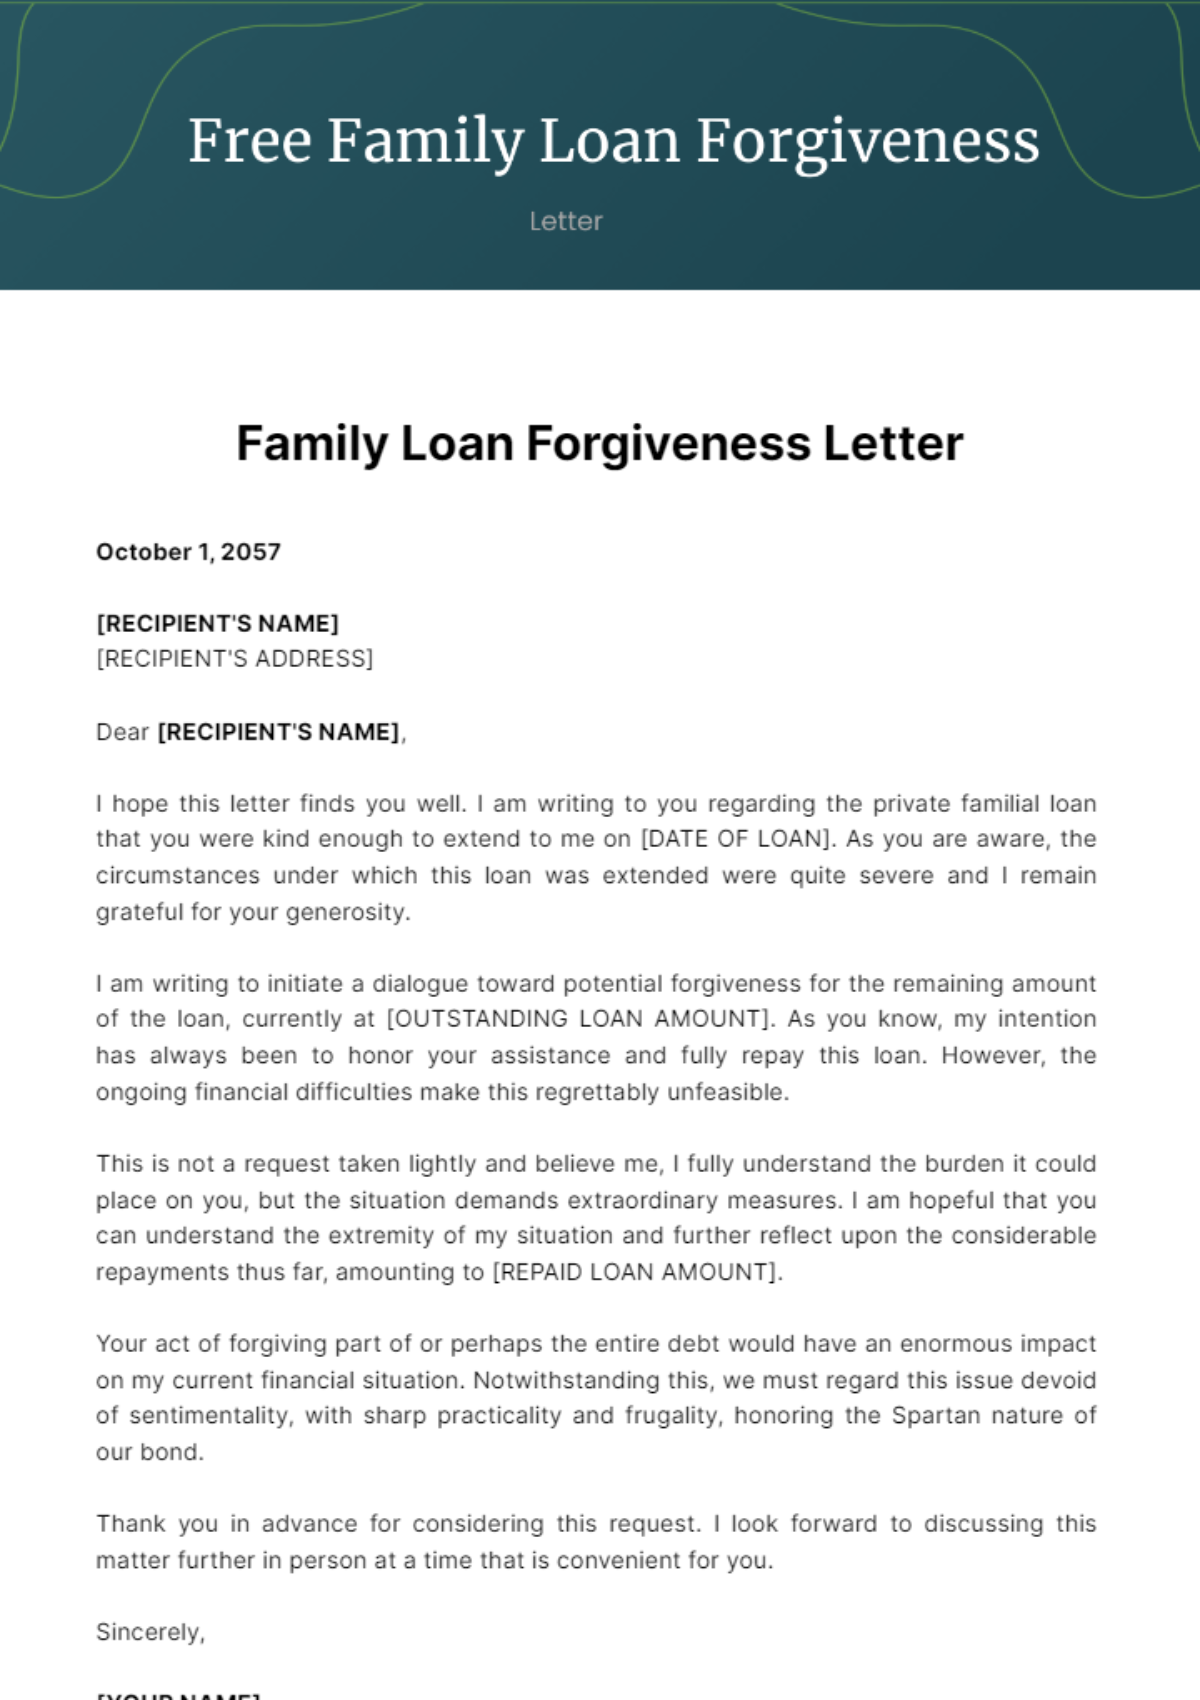 Free Family Loan Forgiveness Letter Template